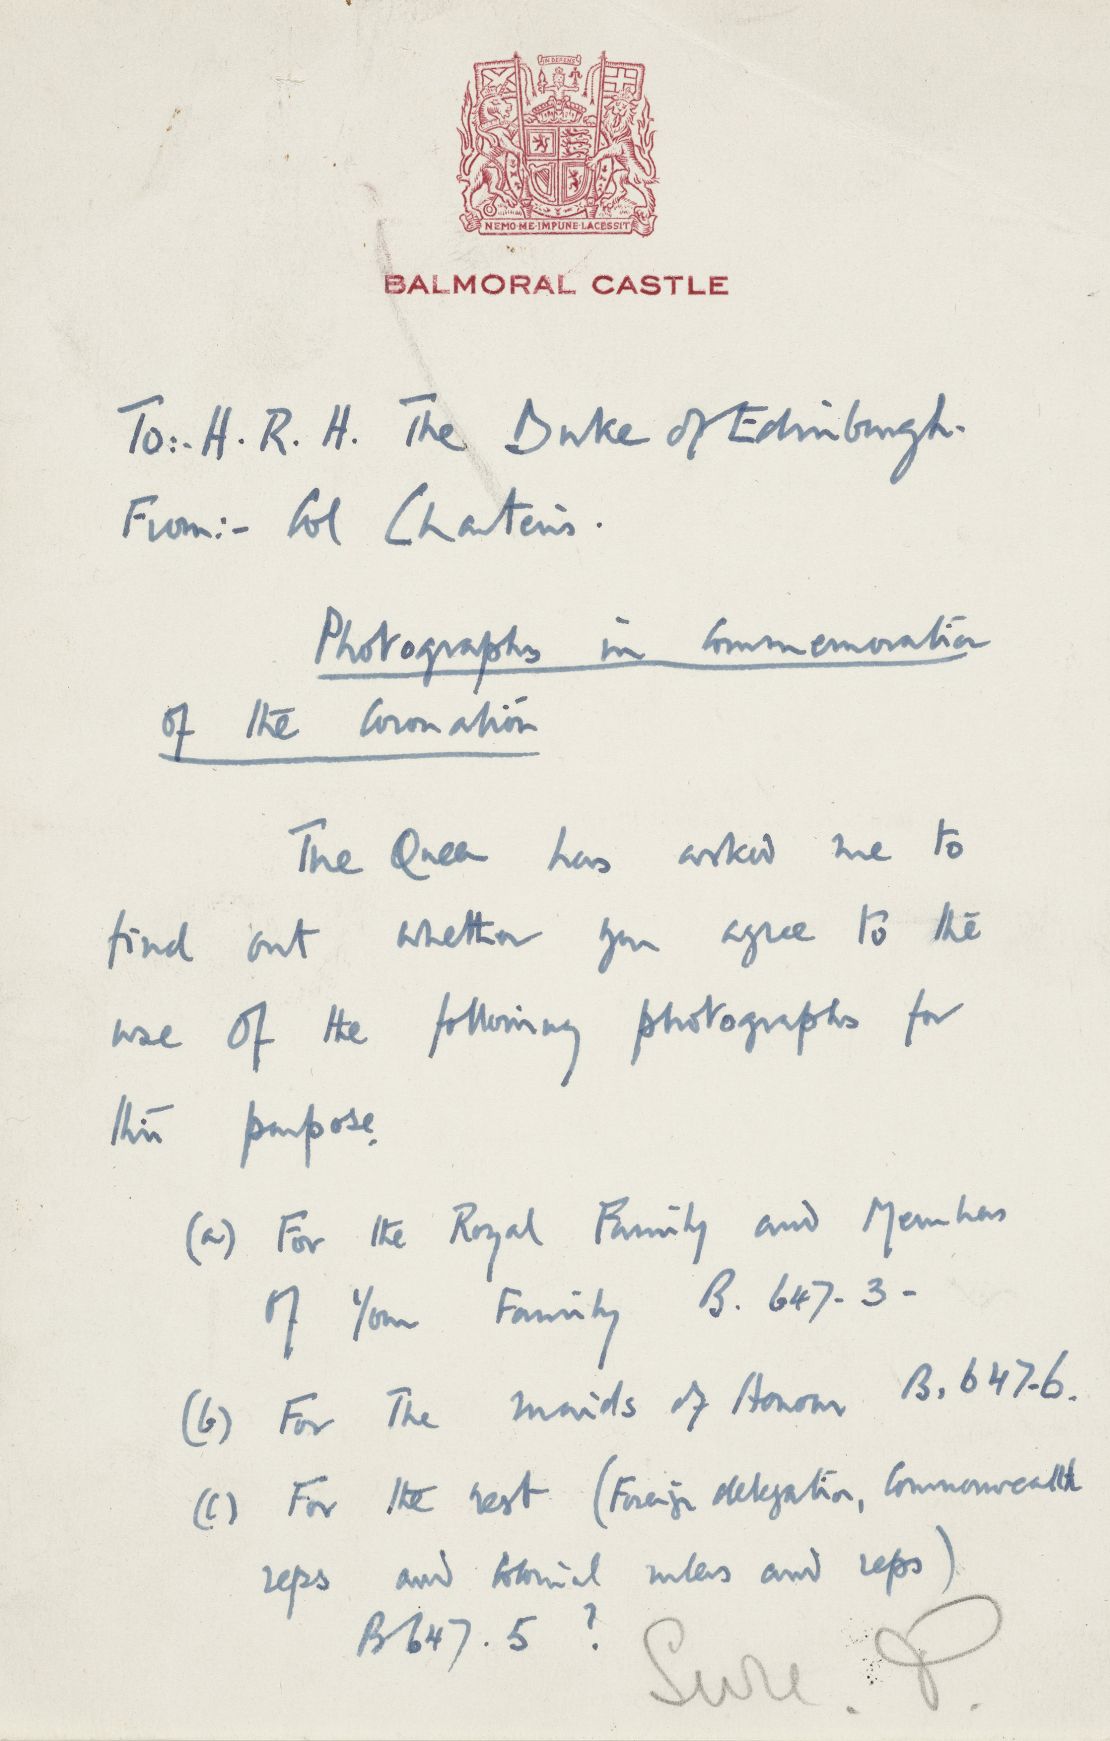 Handwritten note on the use of some coronation photographs, 1953, which features in the exhibition alongside the above contact sheet.